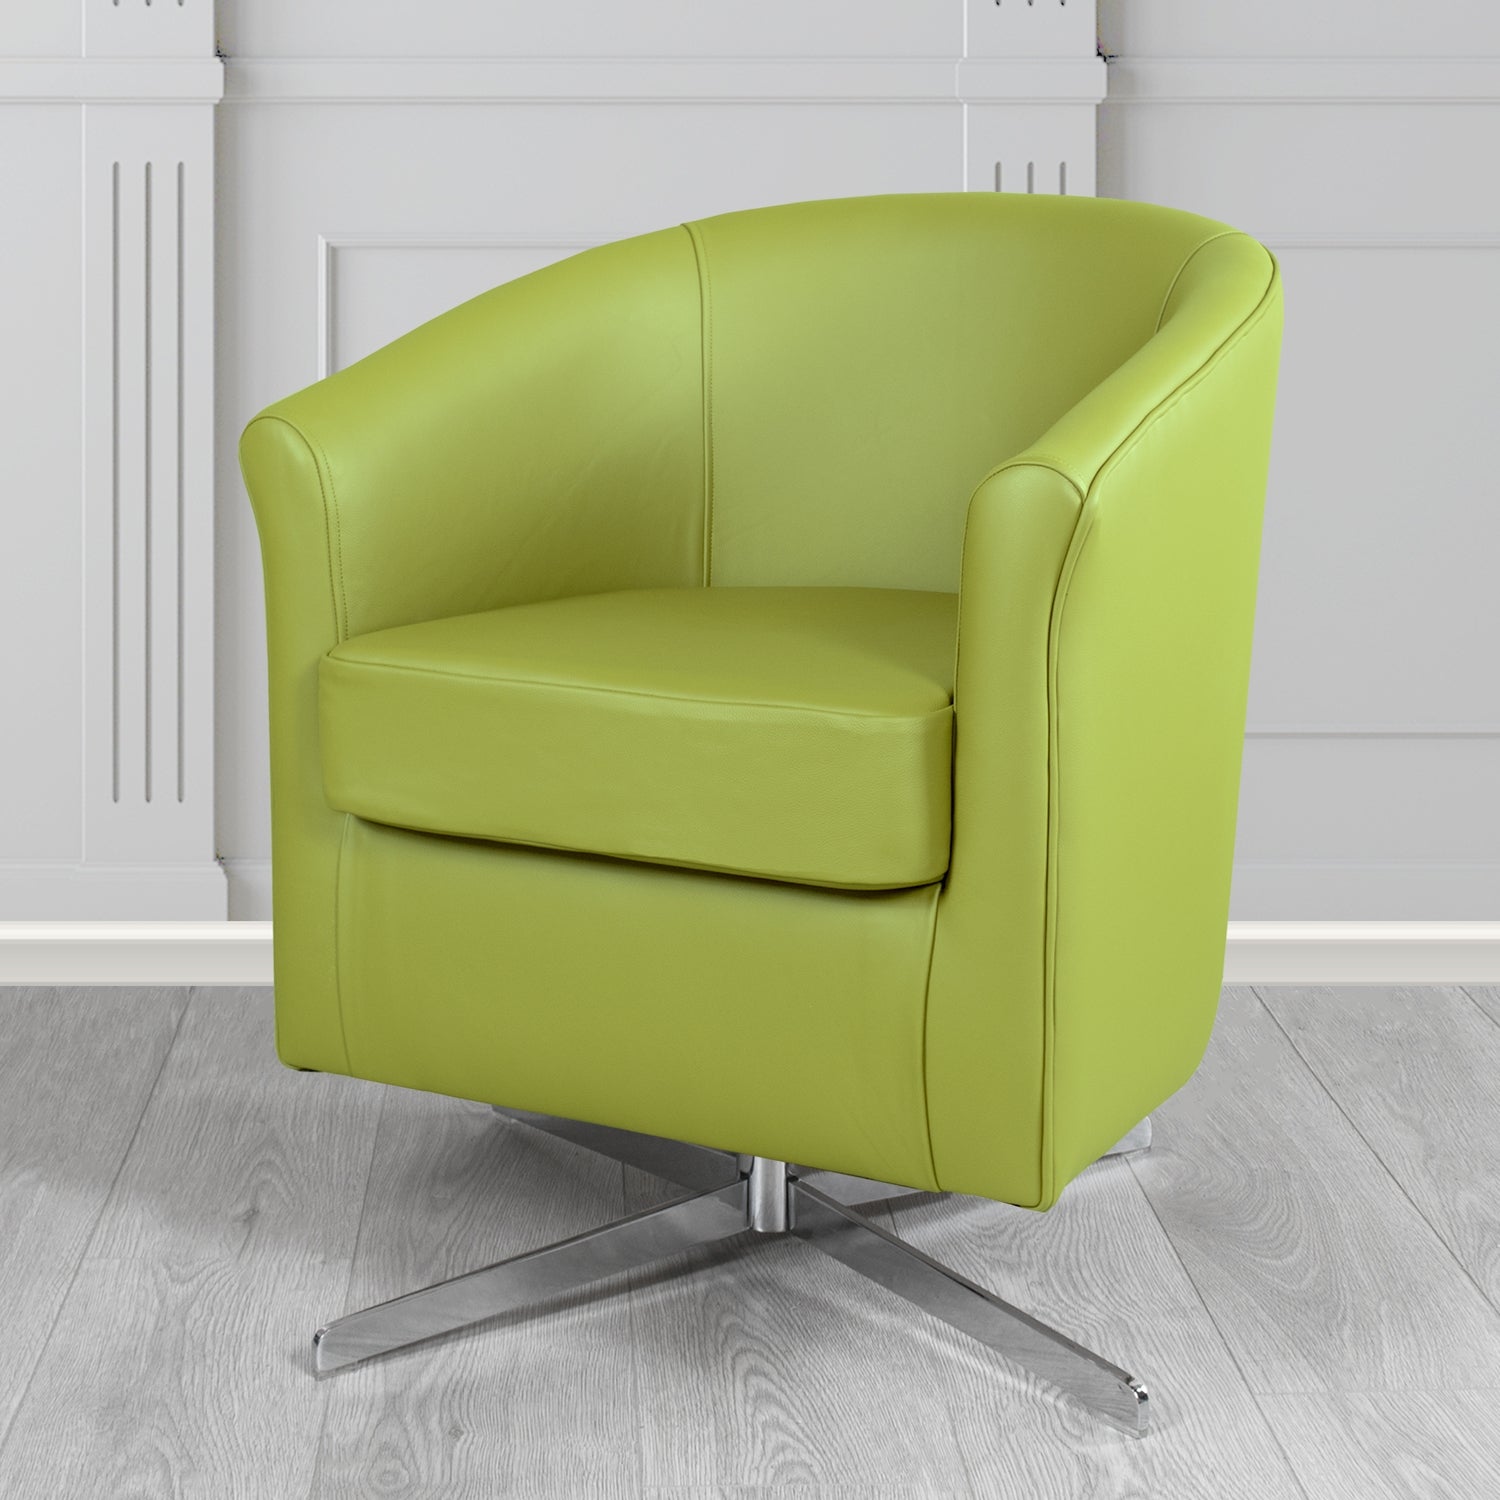 Cannes Swivel Tub Chair in Shelly Field Green Crib 5 Genuine Leather - The Tub Chair Shop